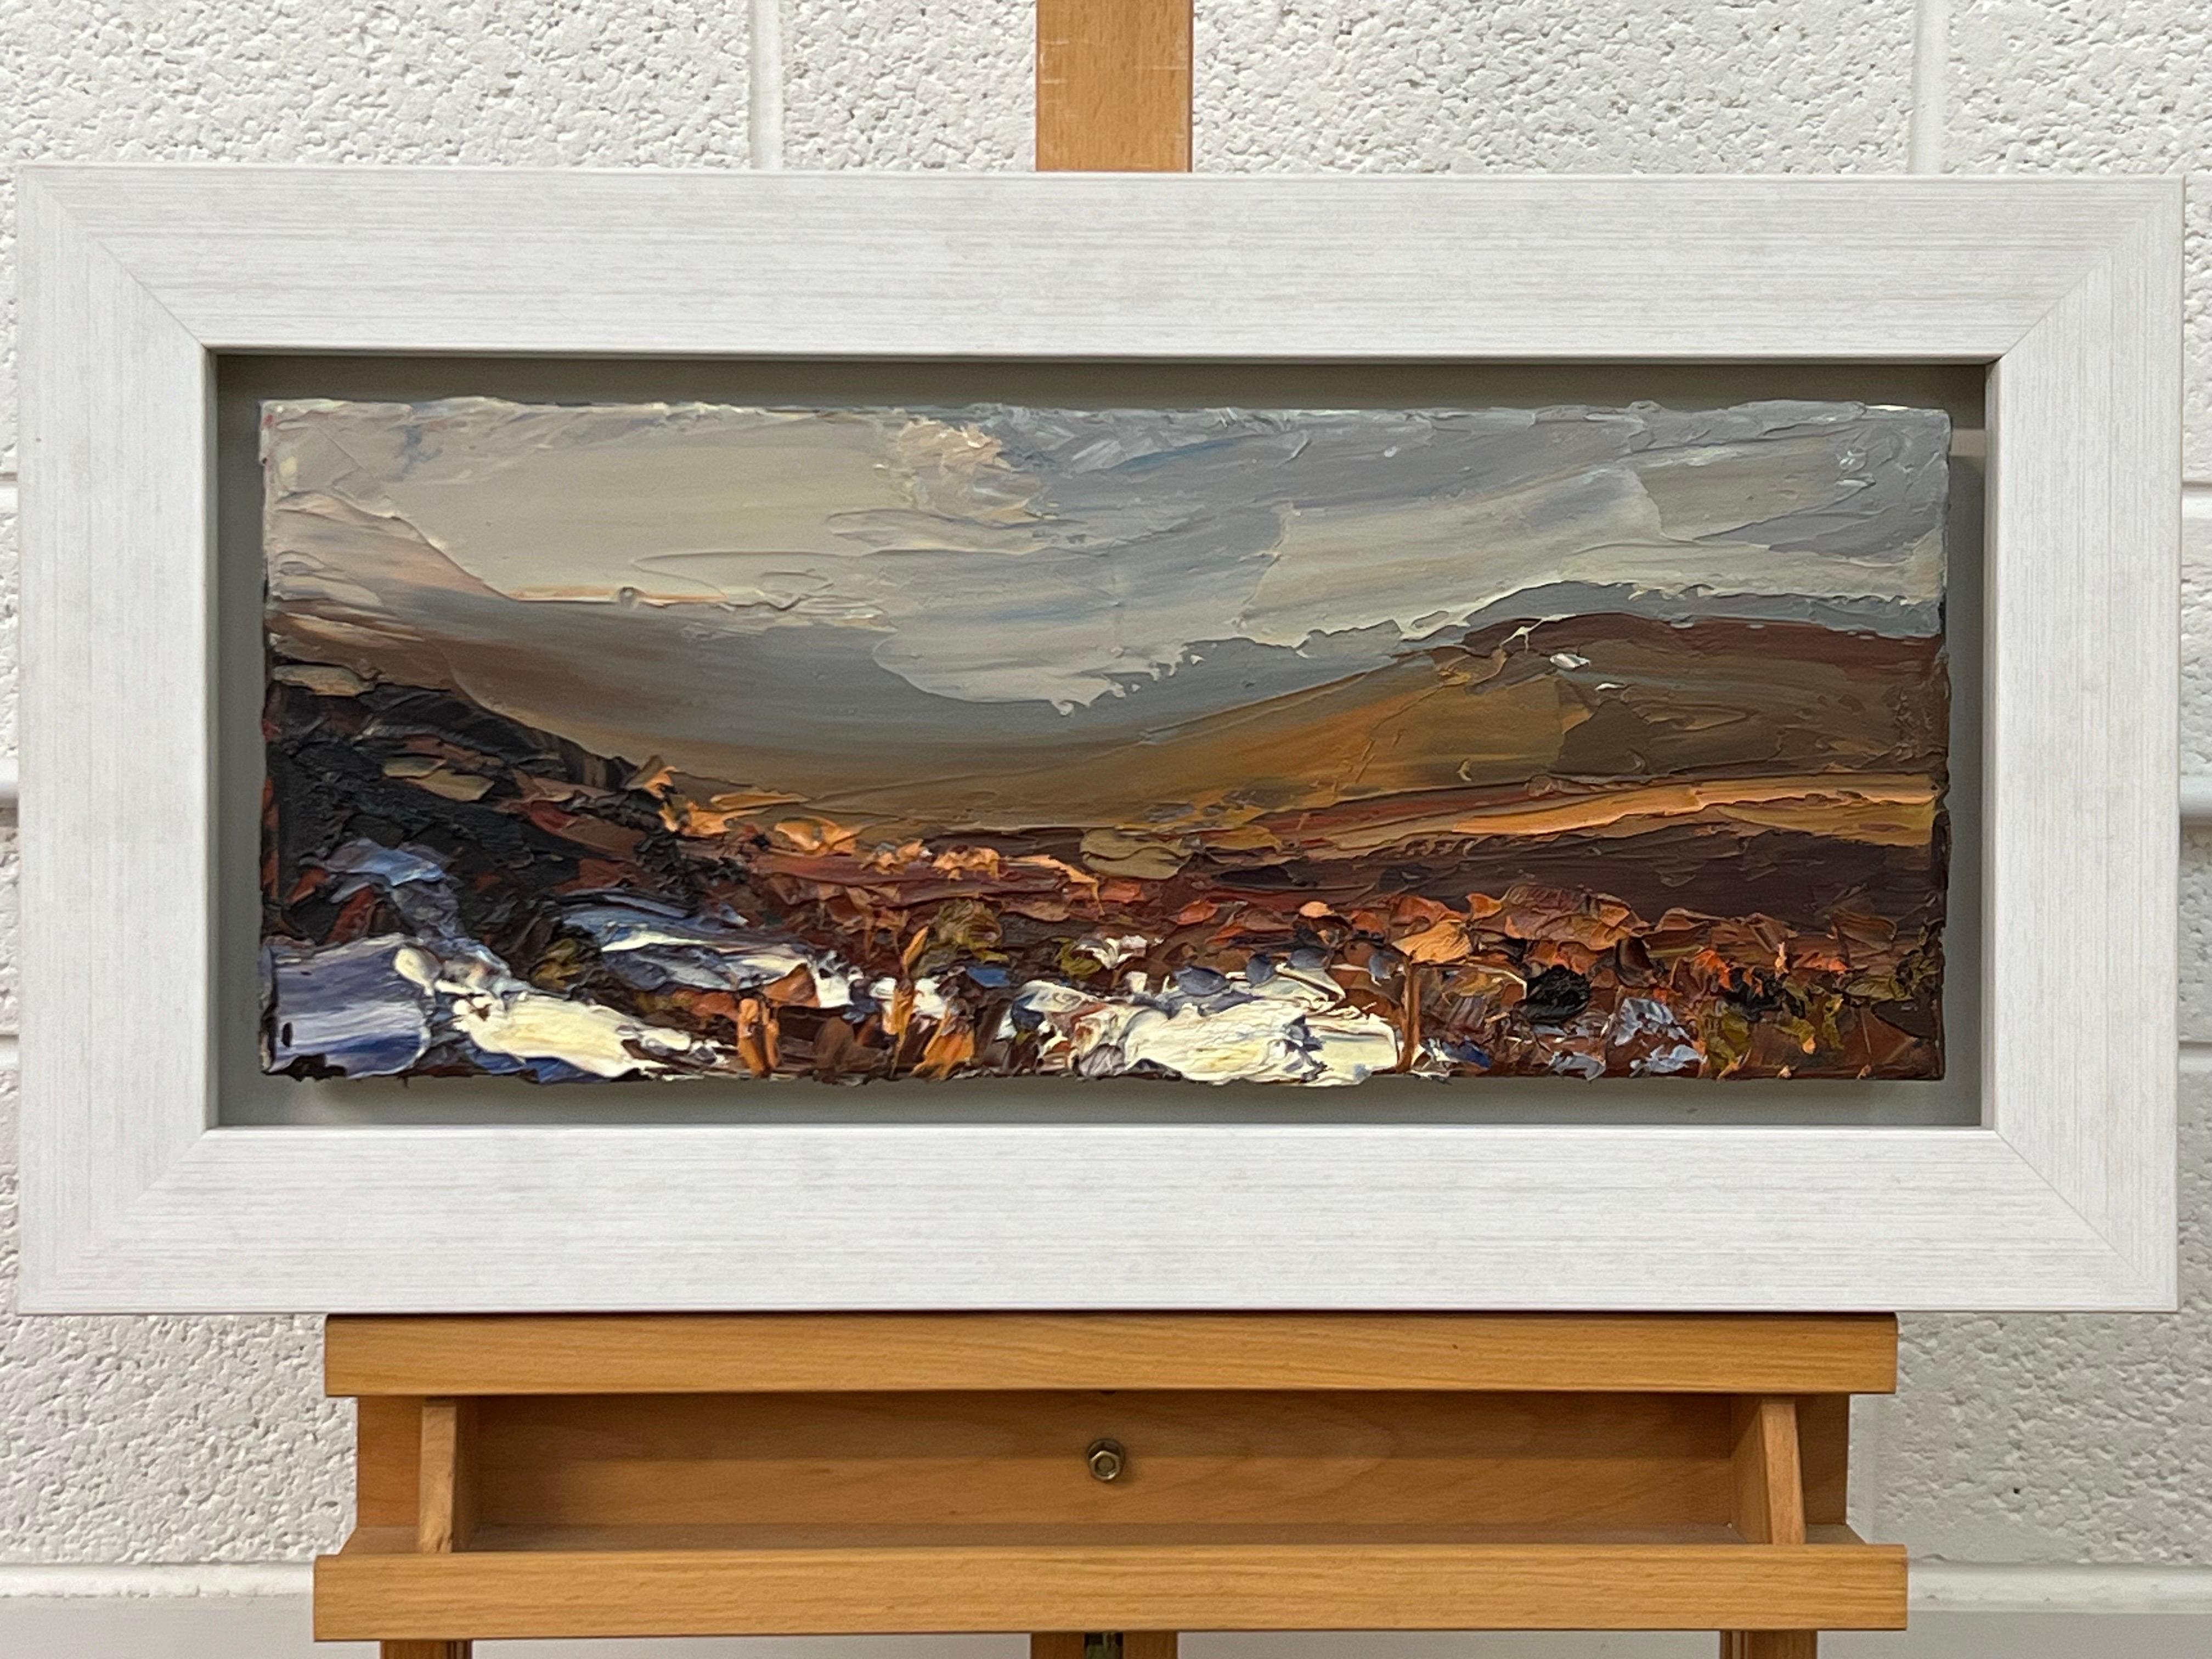 Impasto Oil Painting of Melting Snow on English Moor Landscape by British Artist. Original on Canvas. 

Art measures 20 x 8 inches
Frame measures 25 x 13 inches

Colin Halliday is a highly respected contemporary landscape painter, influenced by the